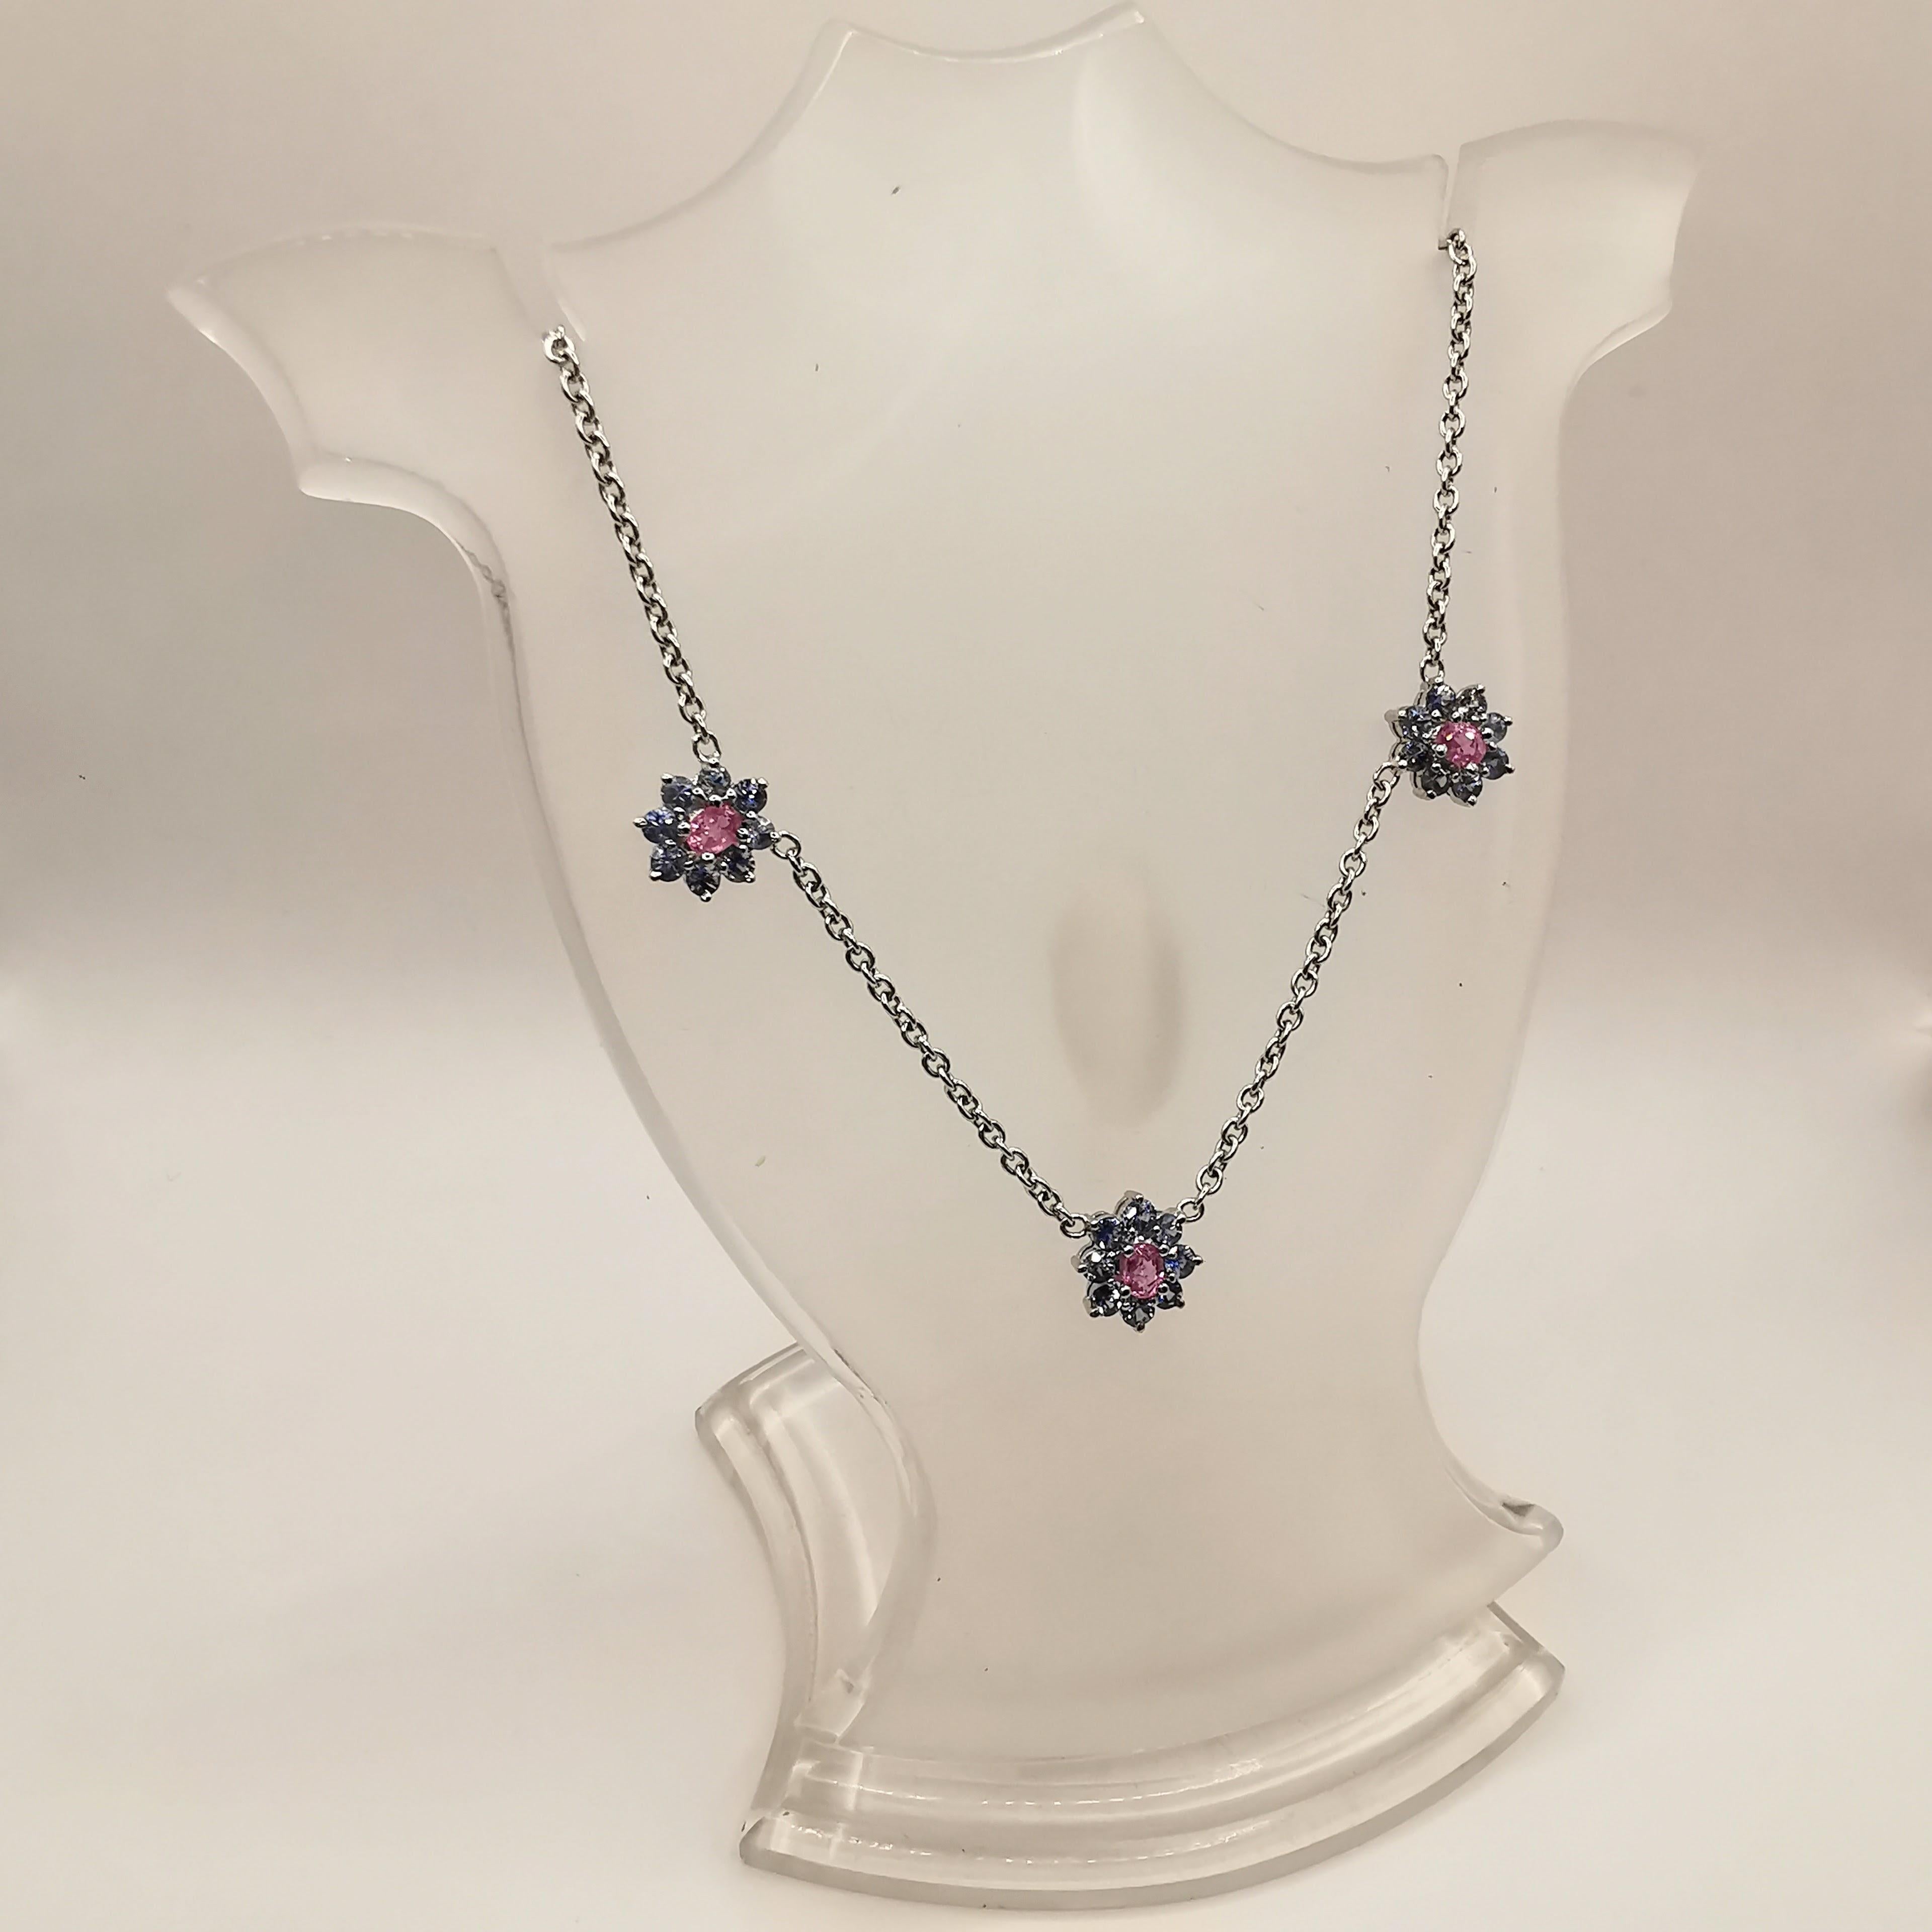 Introducing our beautiful 2.49 Carat Pink & Blue Sapphire Flower Necklace, crafted in 18K white gold. This necklace features a stunning design, made up of three flowers, each one with an oval cut pink sapphire in the center, surrounded by a halo of